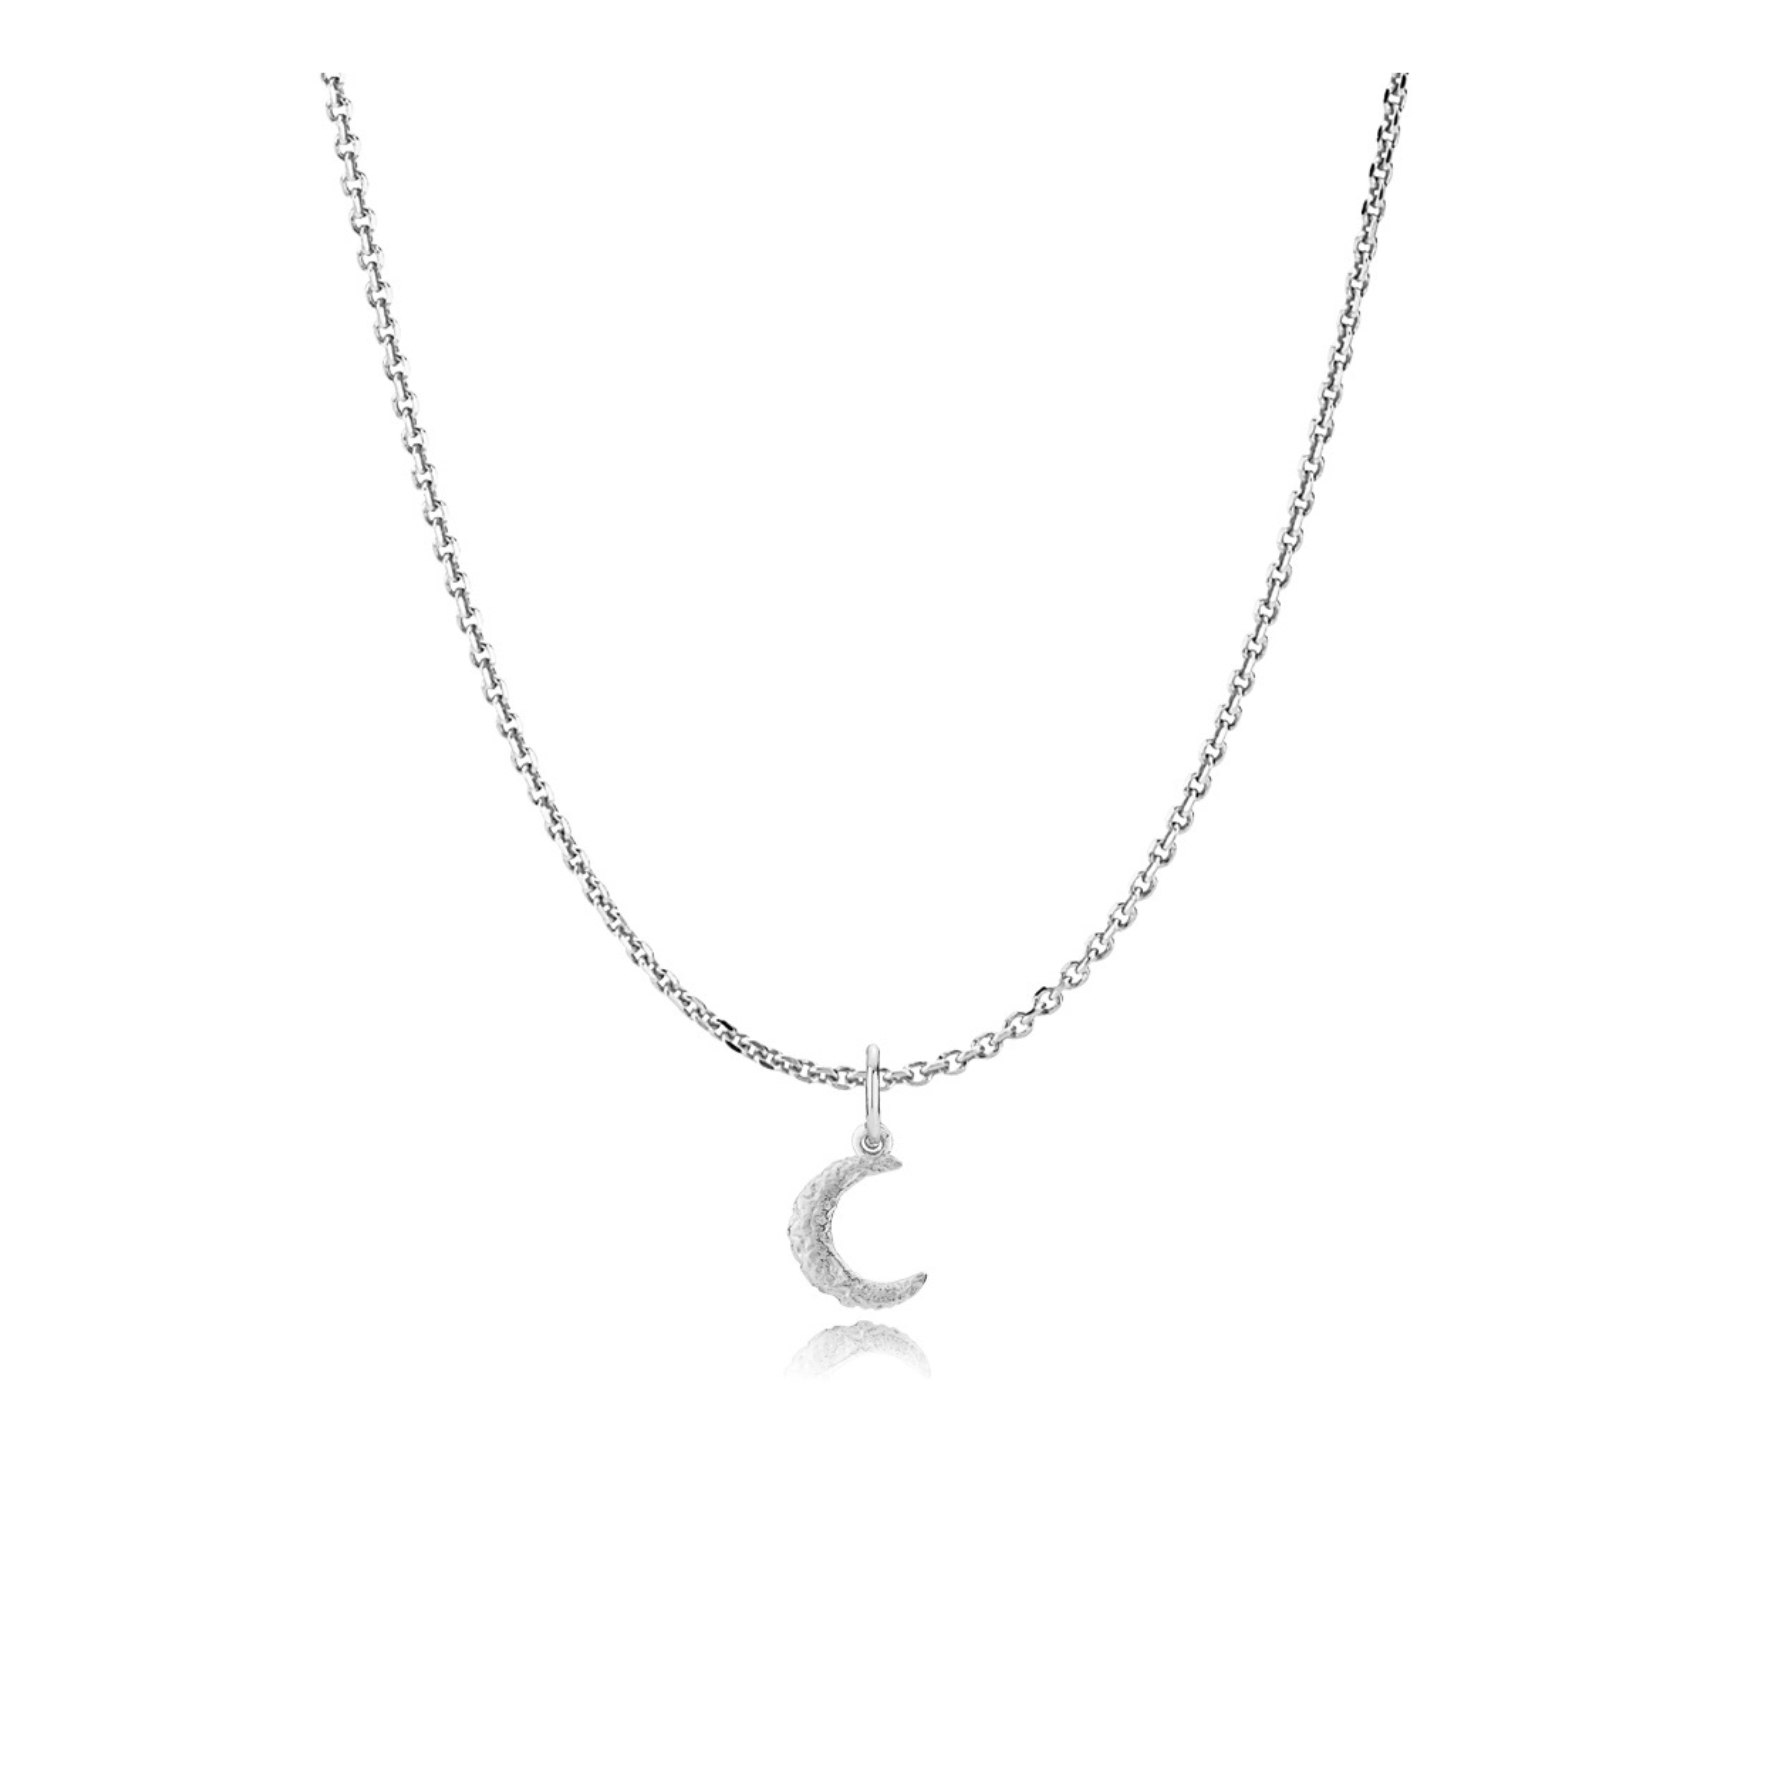 Universe Moon Necklace from Sistie in Silver Sterling 925